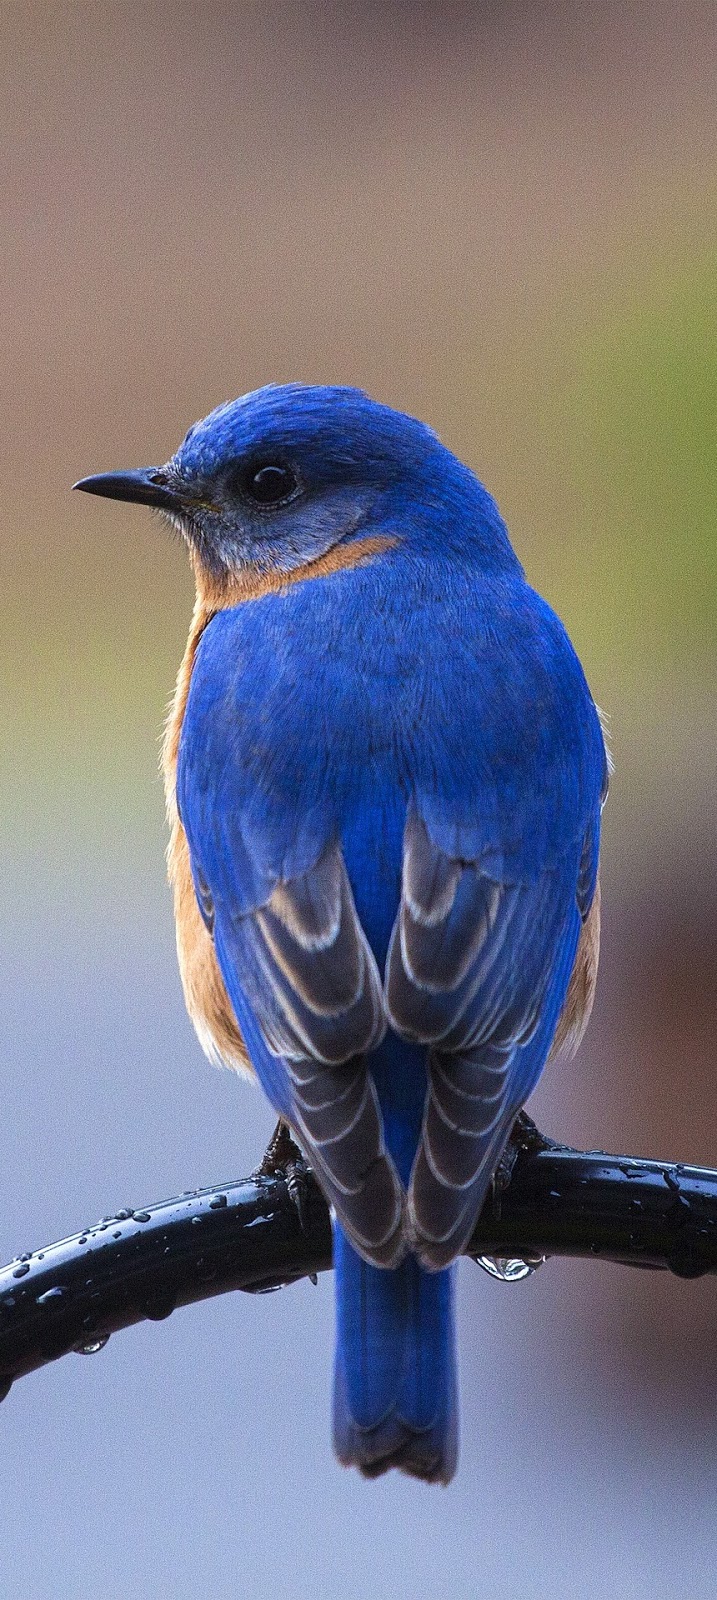 Picture of a beautiful bluebird.